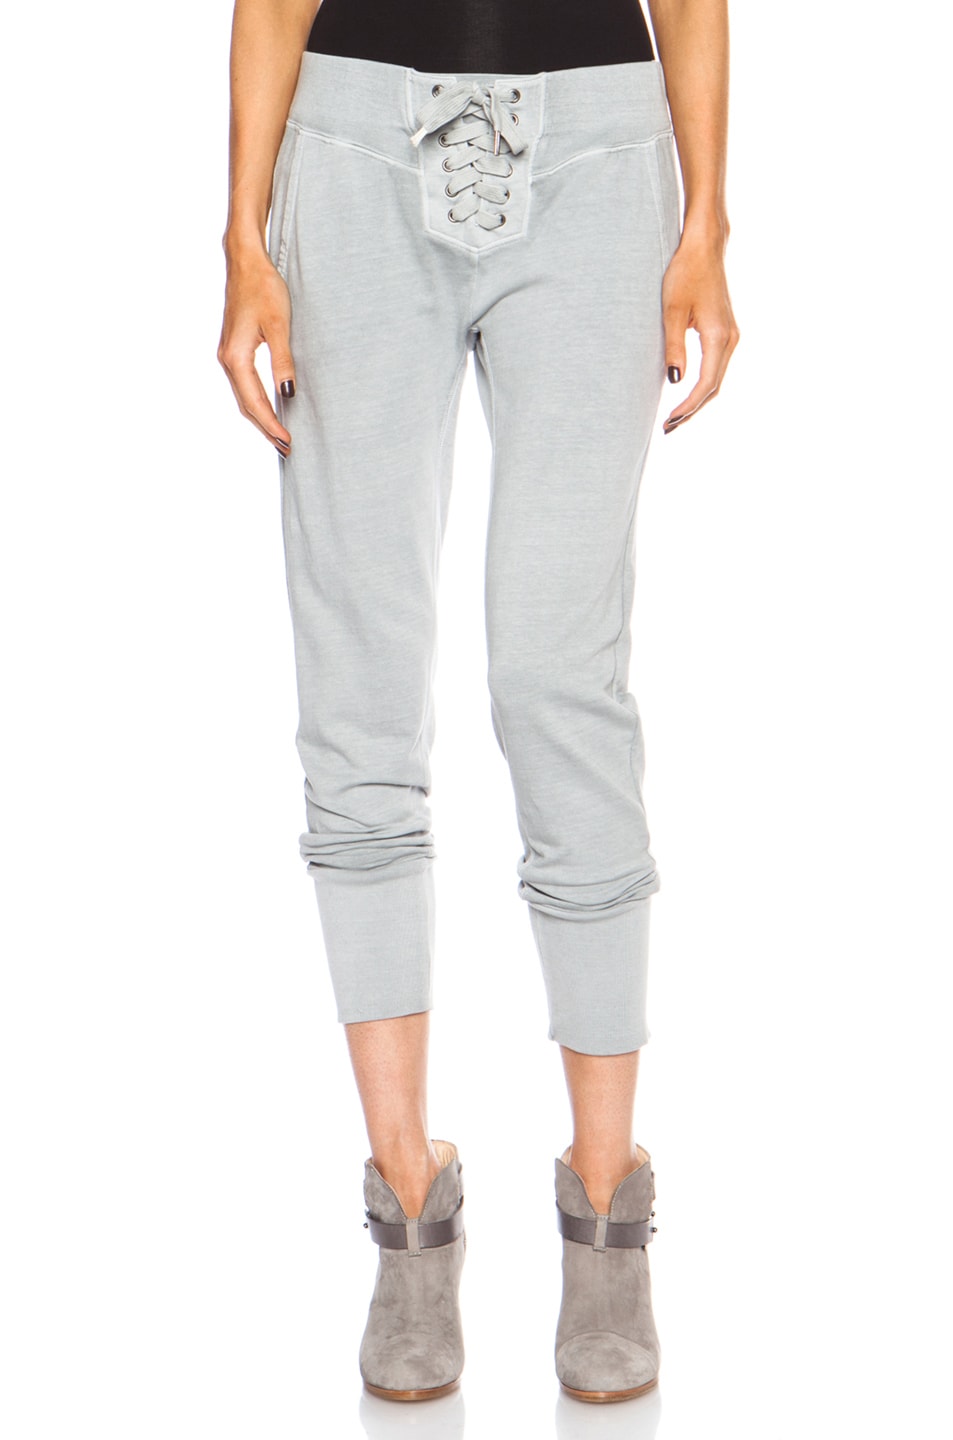 Image 1 of NSF Maddox Cotton-Blend Sweatpants in Pigment Pale Grey